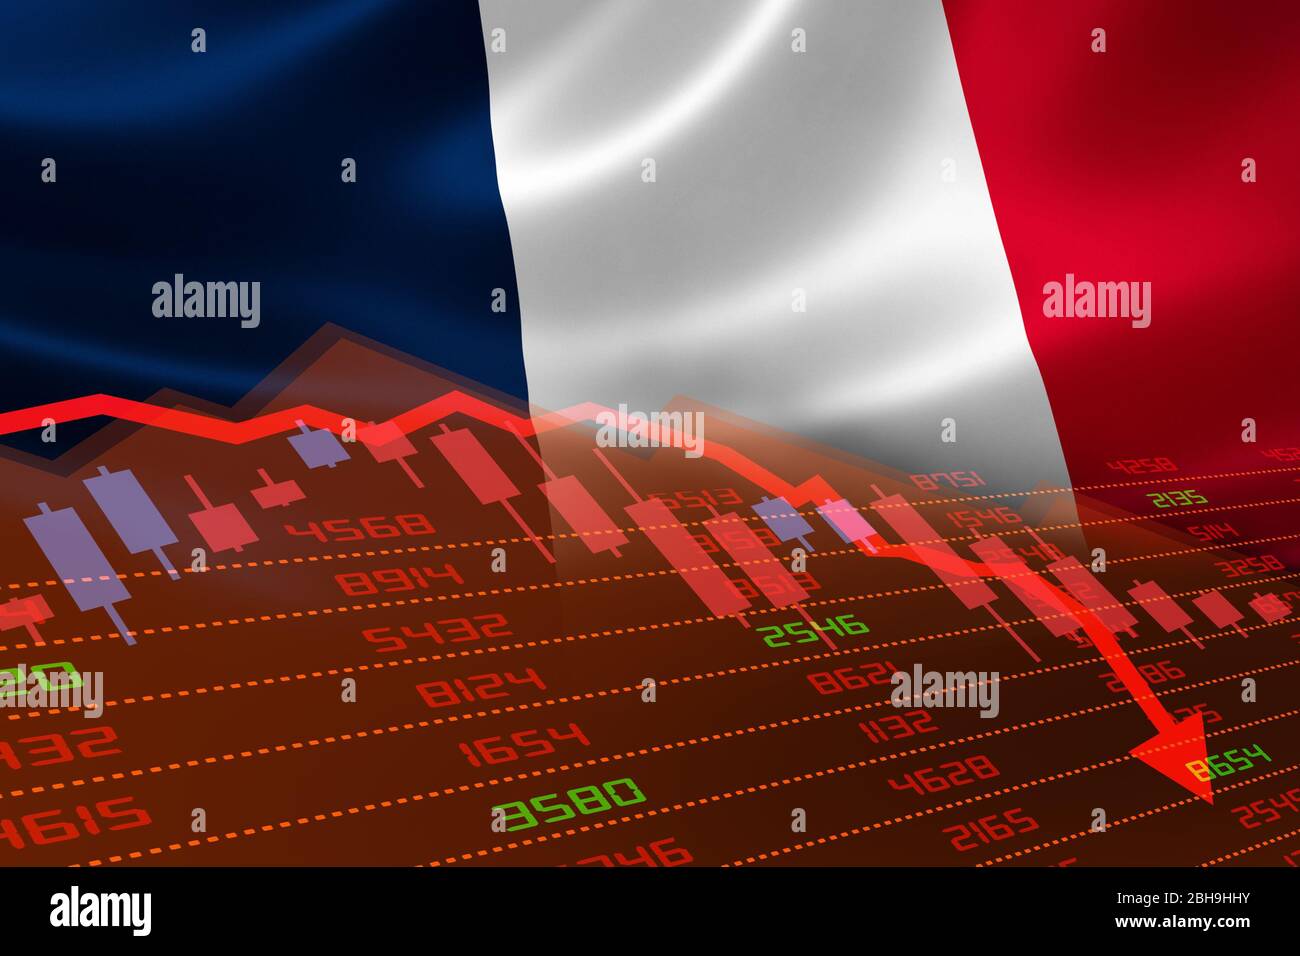 France economic downturn with stock exchange market showing stock chart down and in red negative territory. Business and financial money market crisis Stock Photo